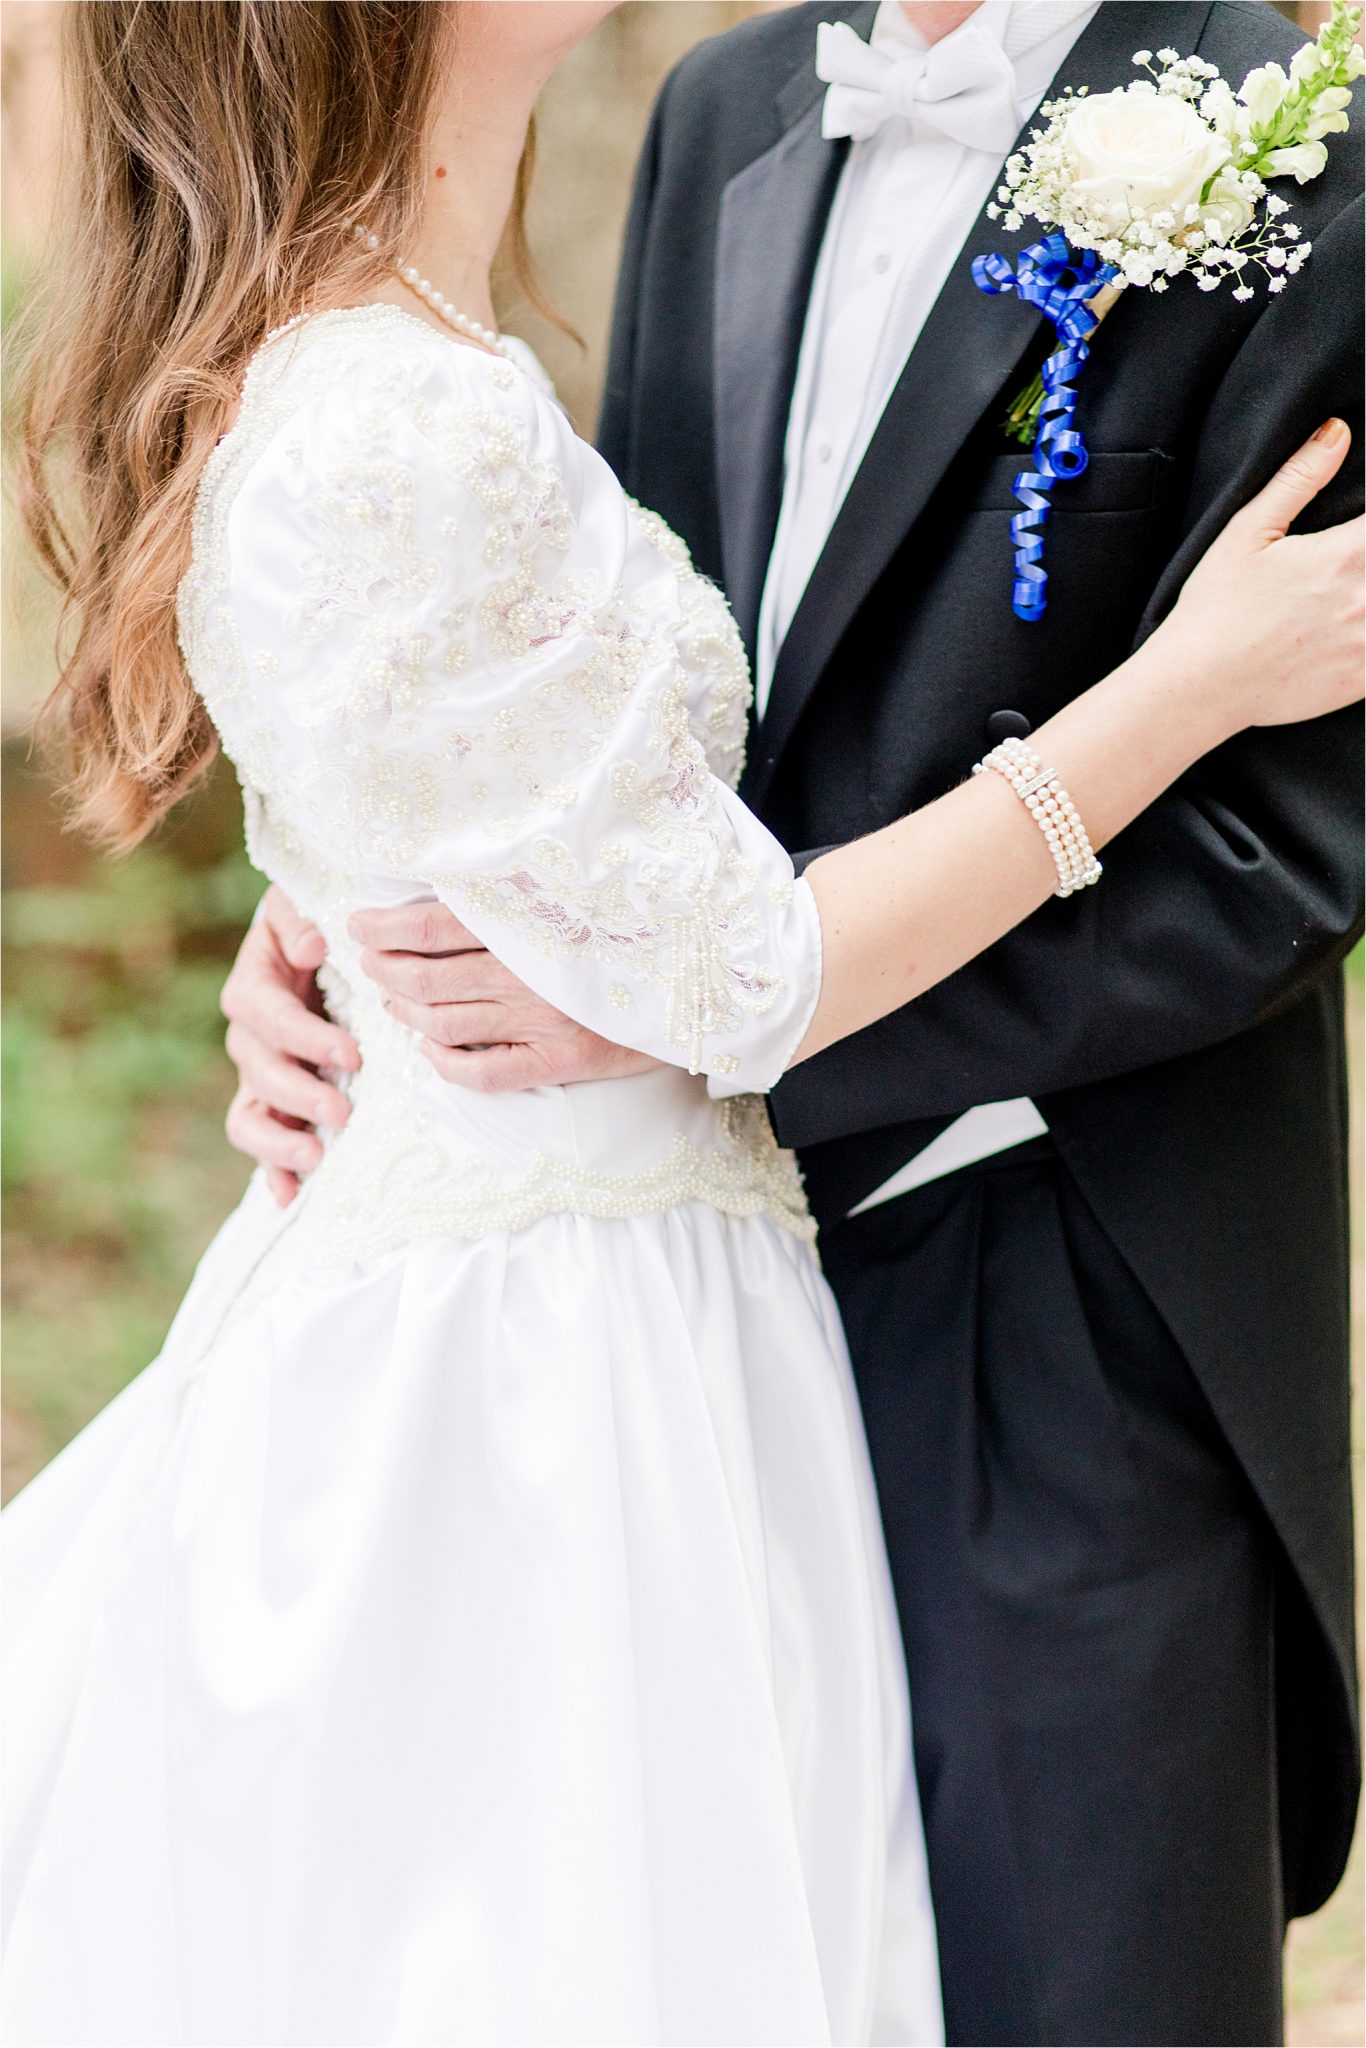 wedding dress with puffy sleeves-pearl beading-rose corsage-bride and groom